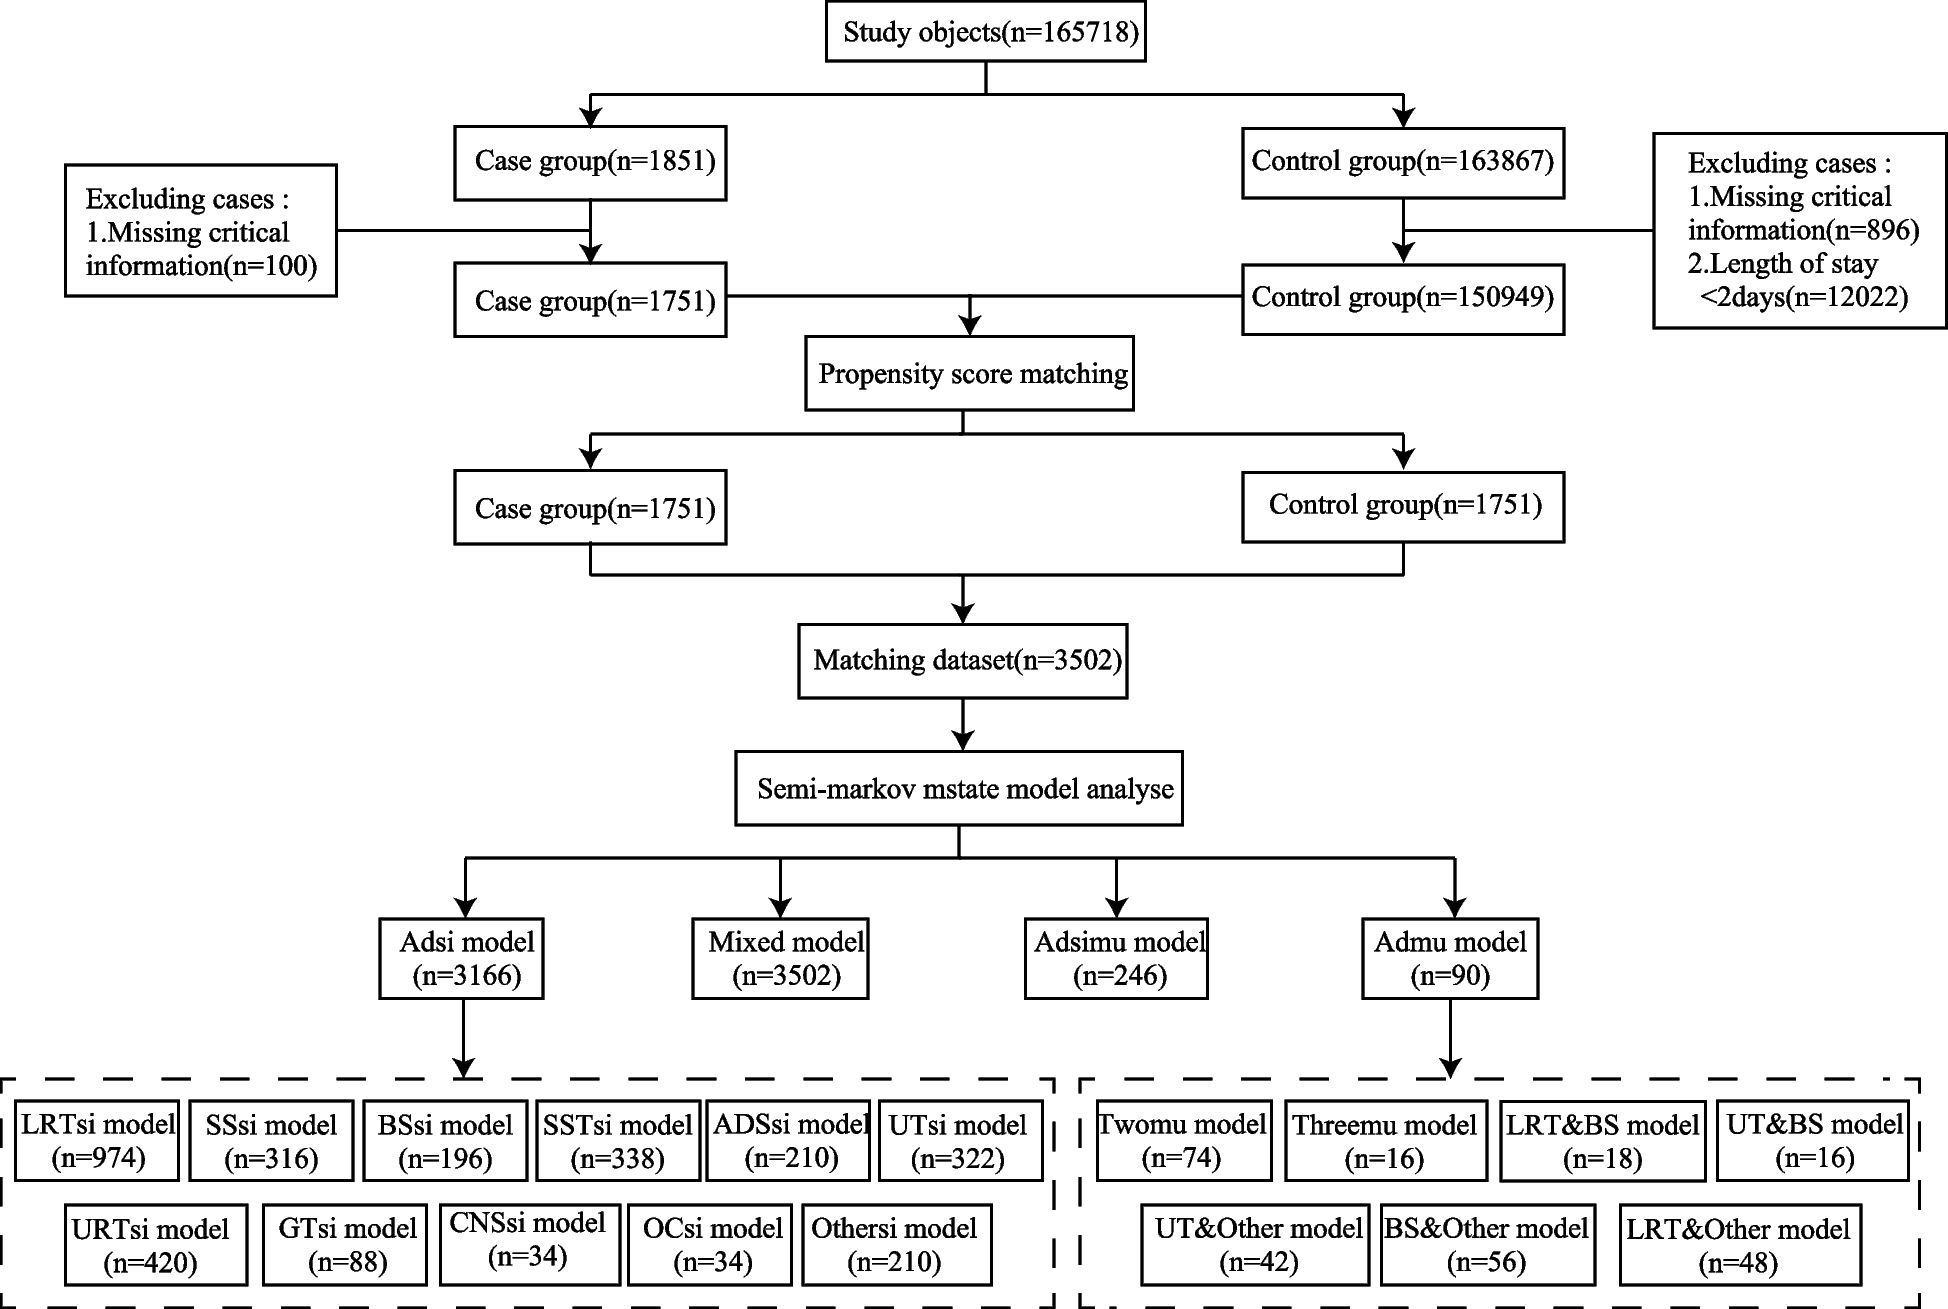 Investigation of multiple nosocomial infections using a semi-Markov multi-state model